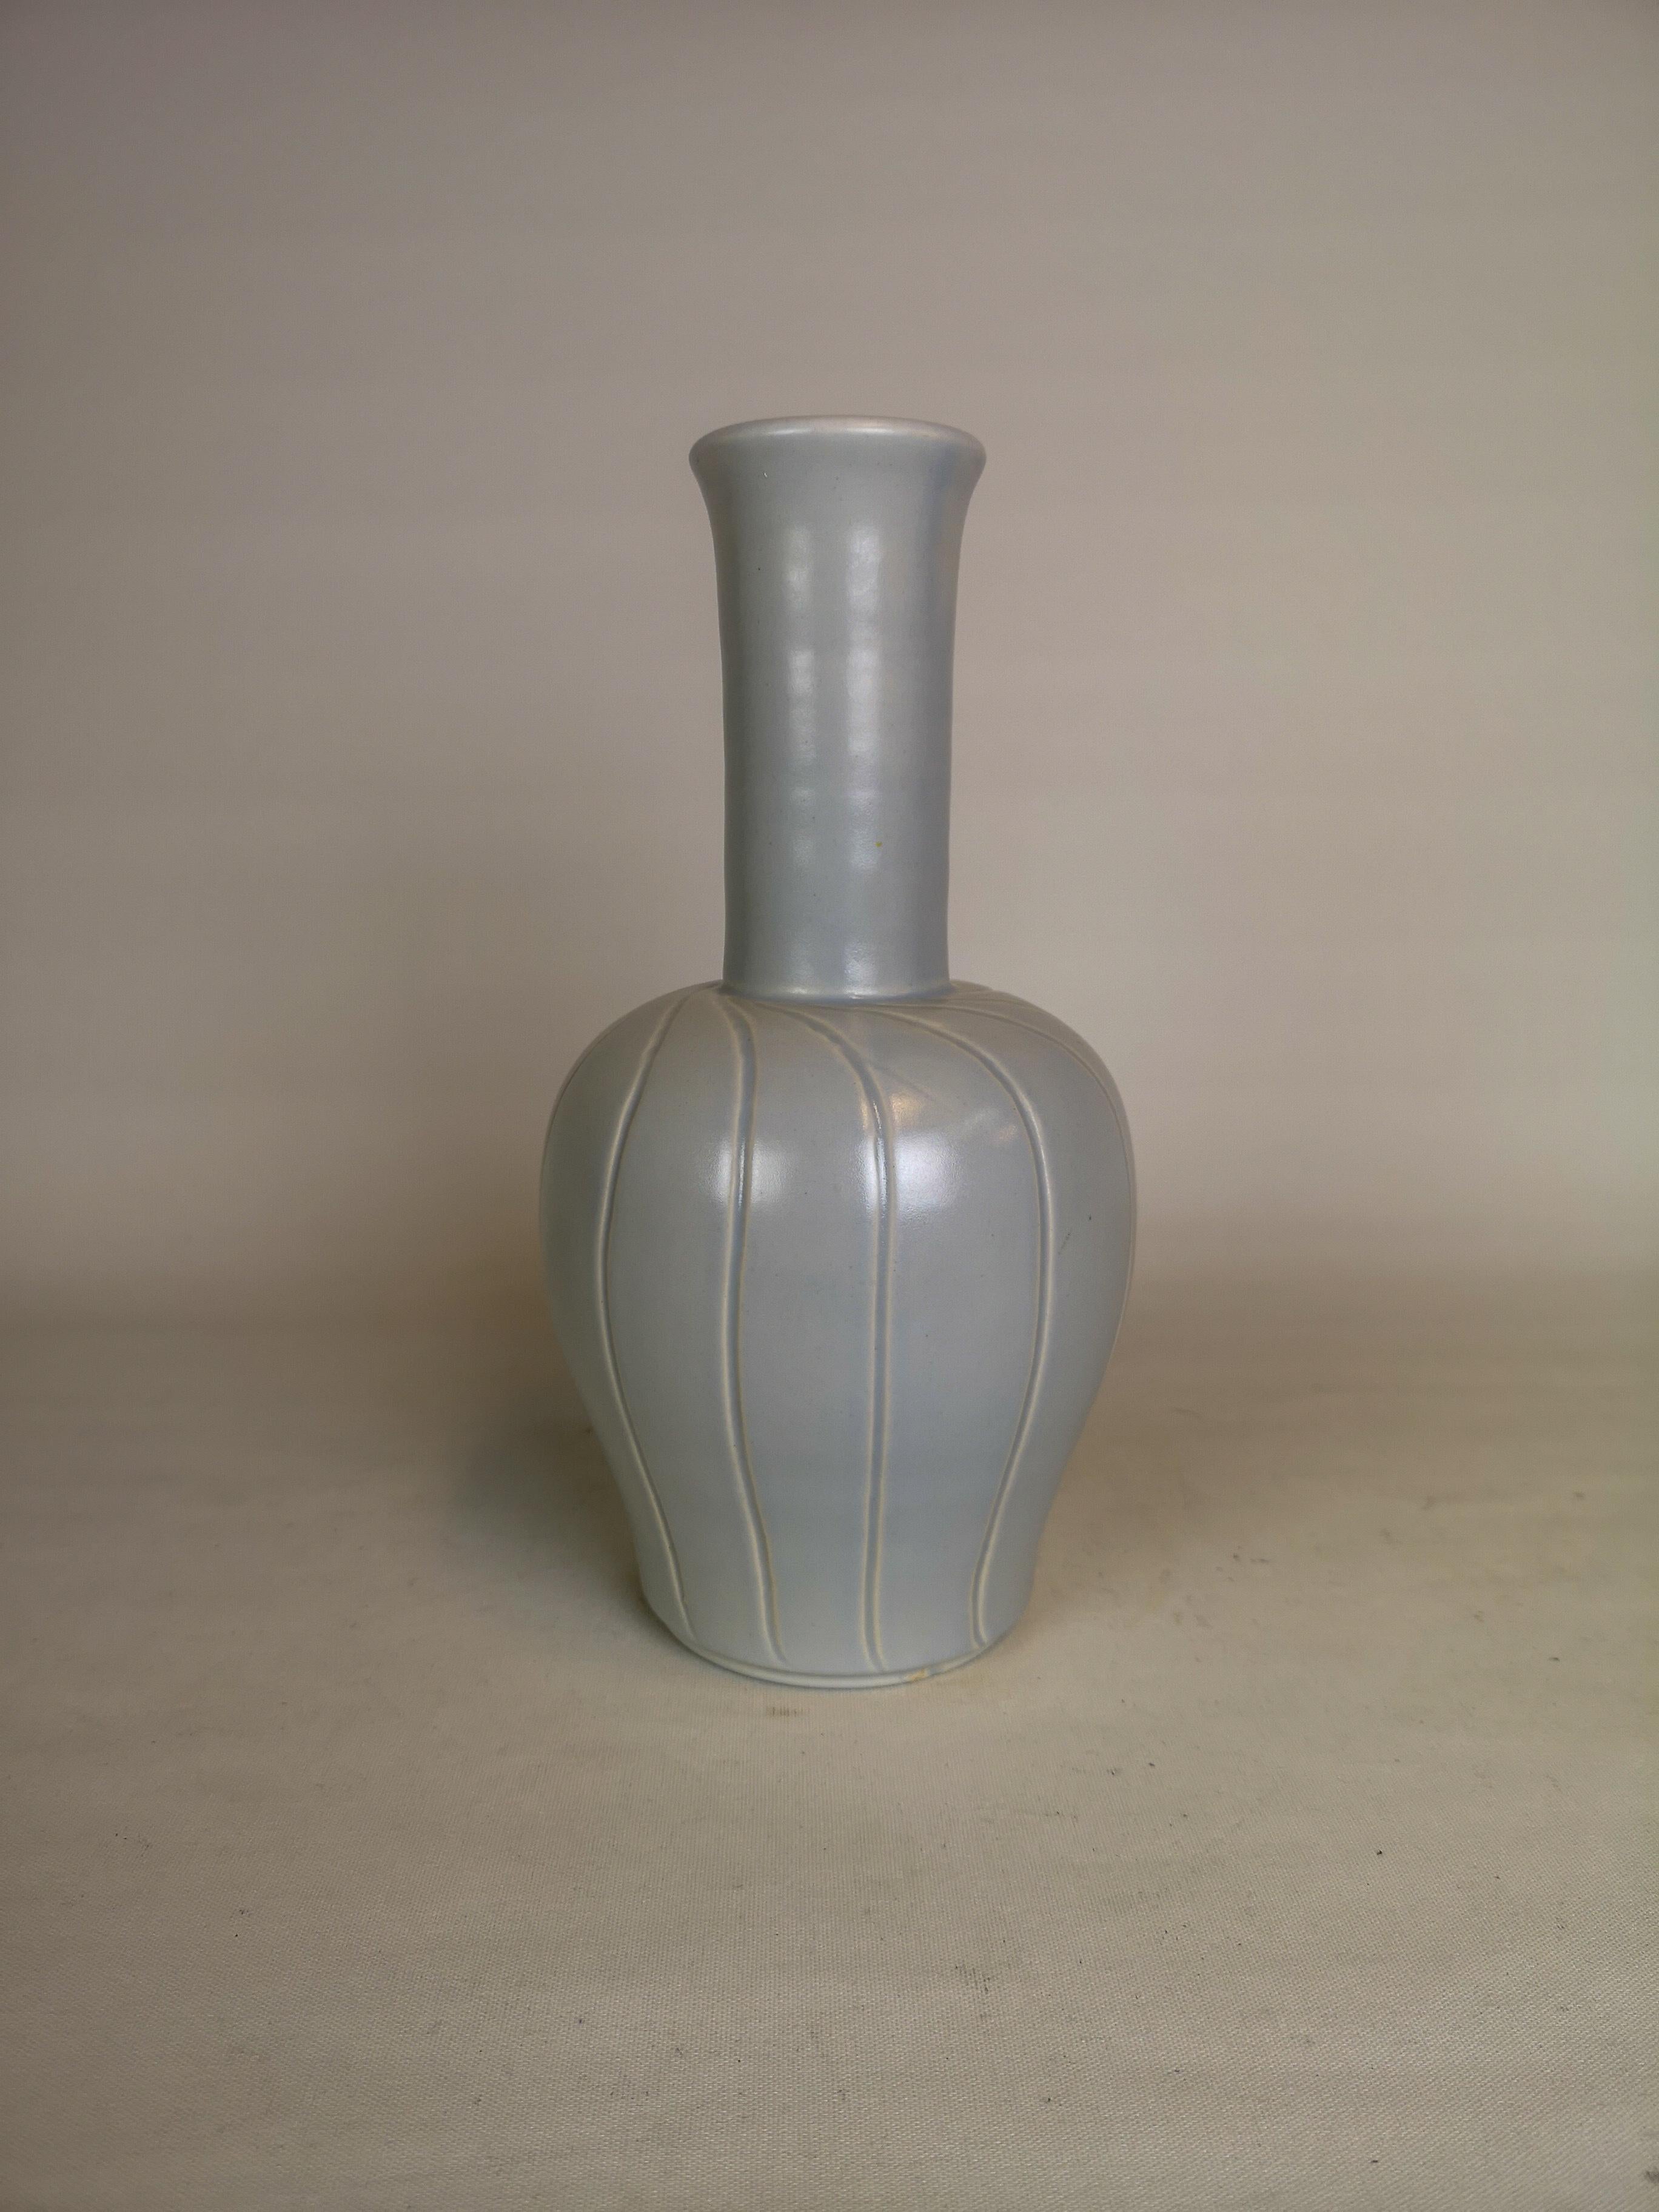 Wonderful ceramic vase manufactured in Sweden at Bo Fajans and designed by Ewald Dahlskog in the 1940s. 
The shape and lines of the vase goes perfect with the wonderful glaze. 

Very good condition. 

Measures: H 27, D 14 cm.
 